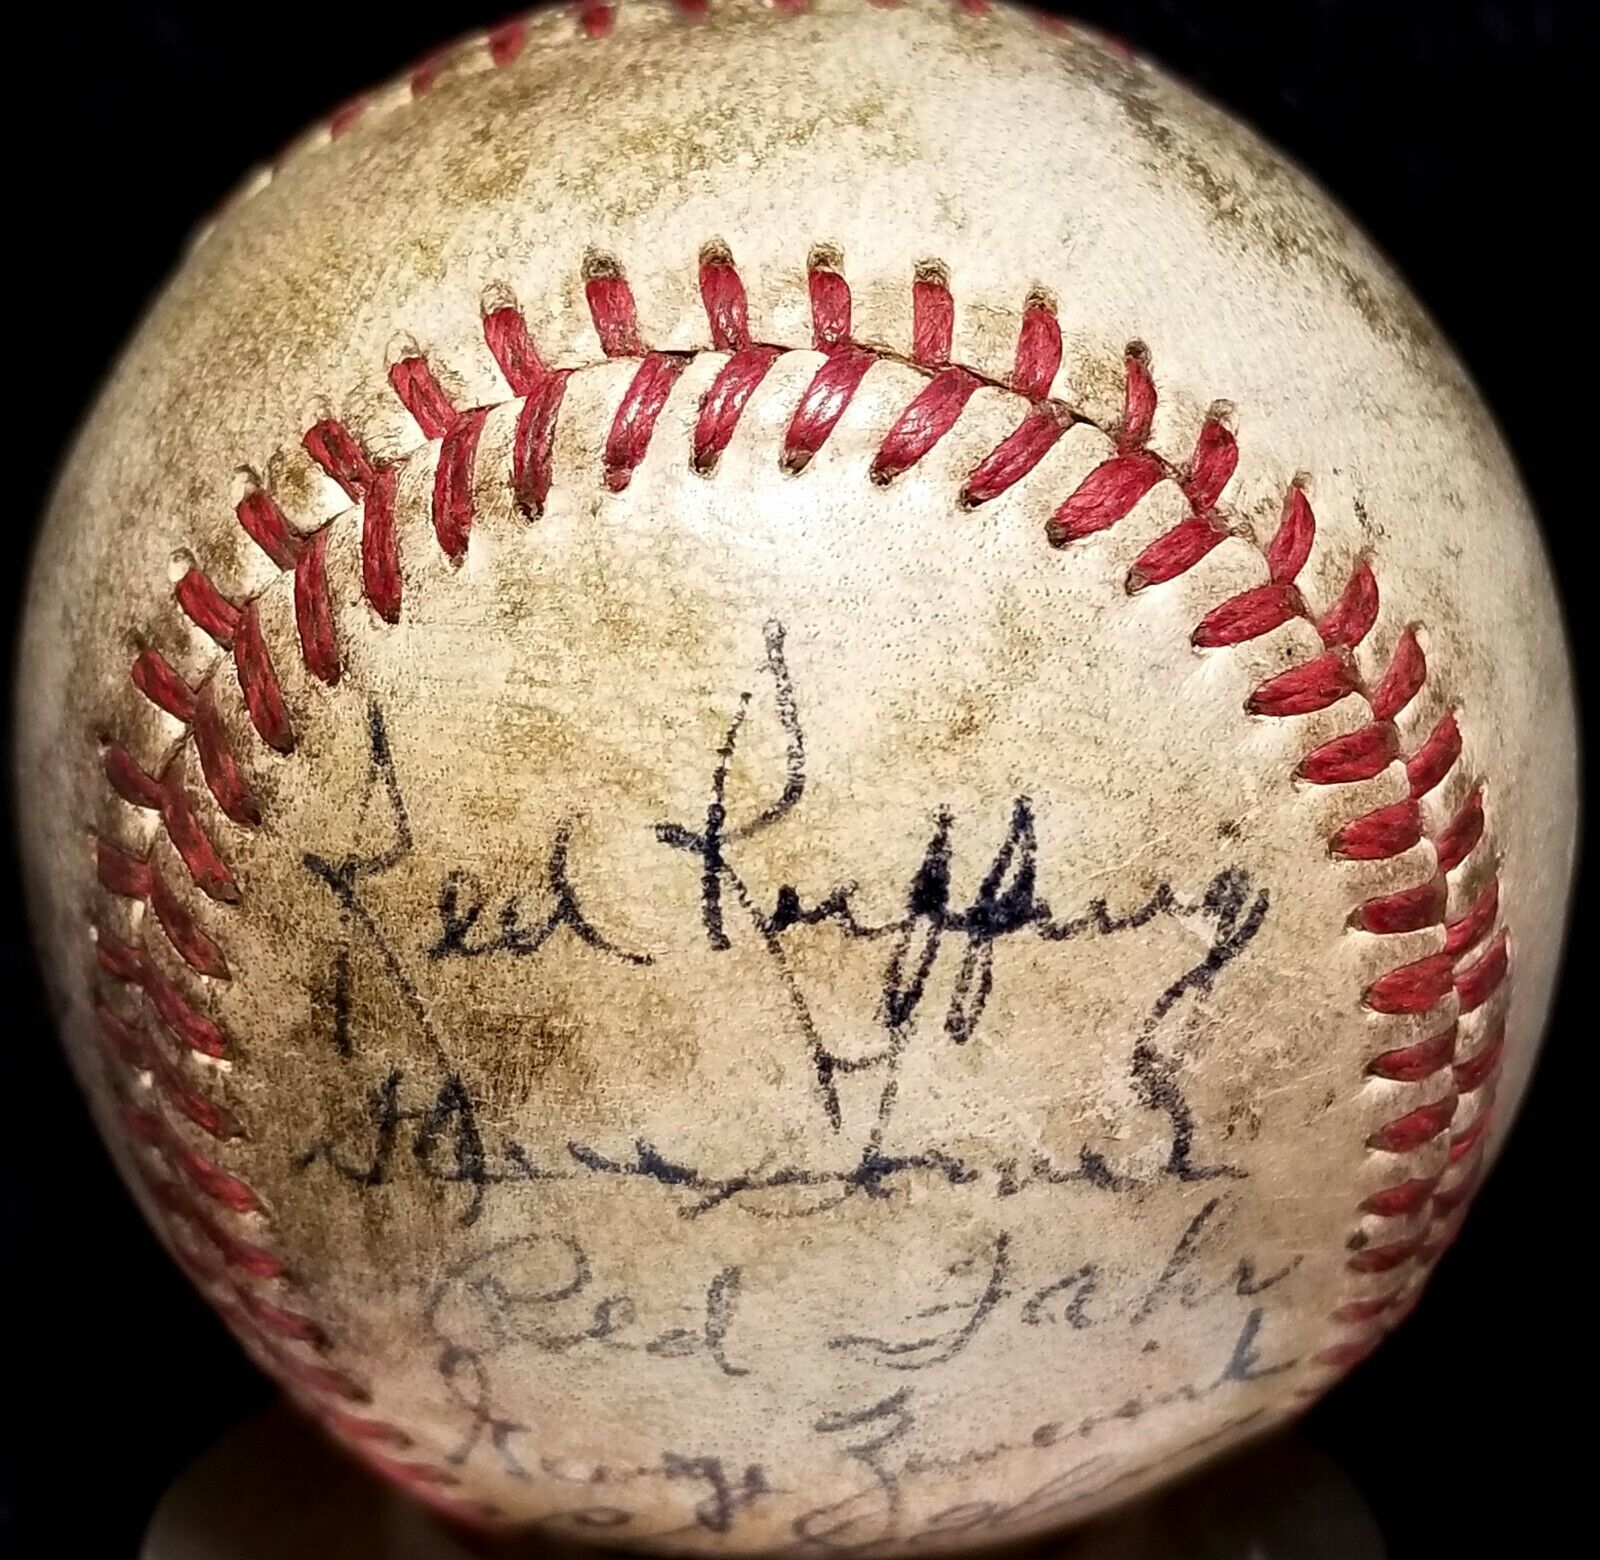 1951 RED RUFFING Signed OAL Reach Ball HOF vtg 50s Cleveland IndiansTeam PSA